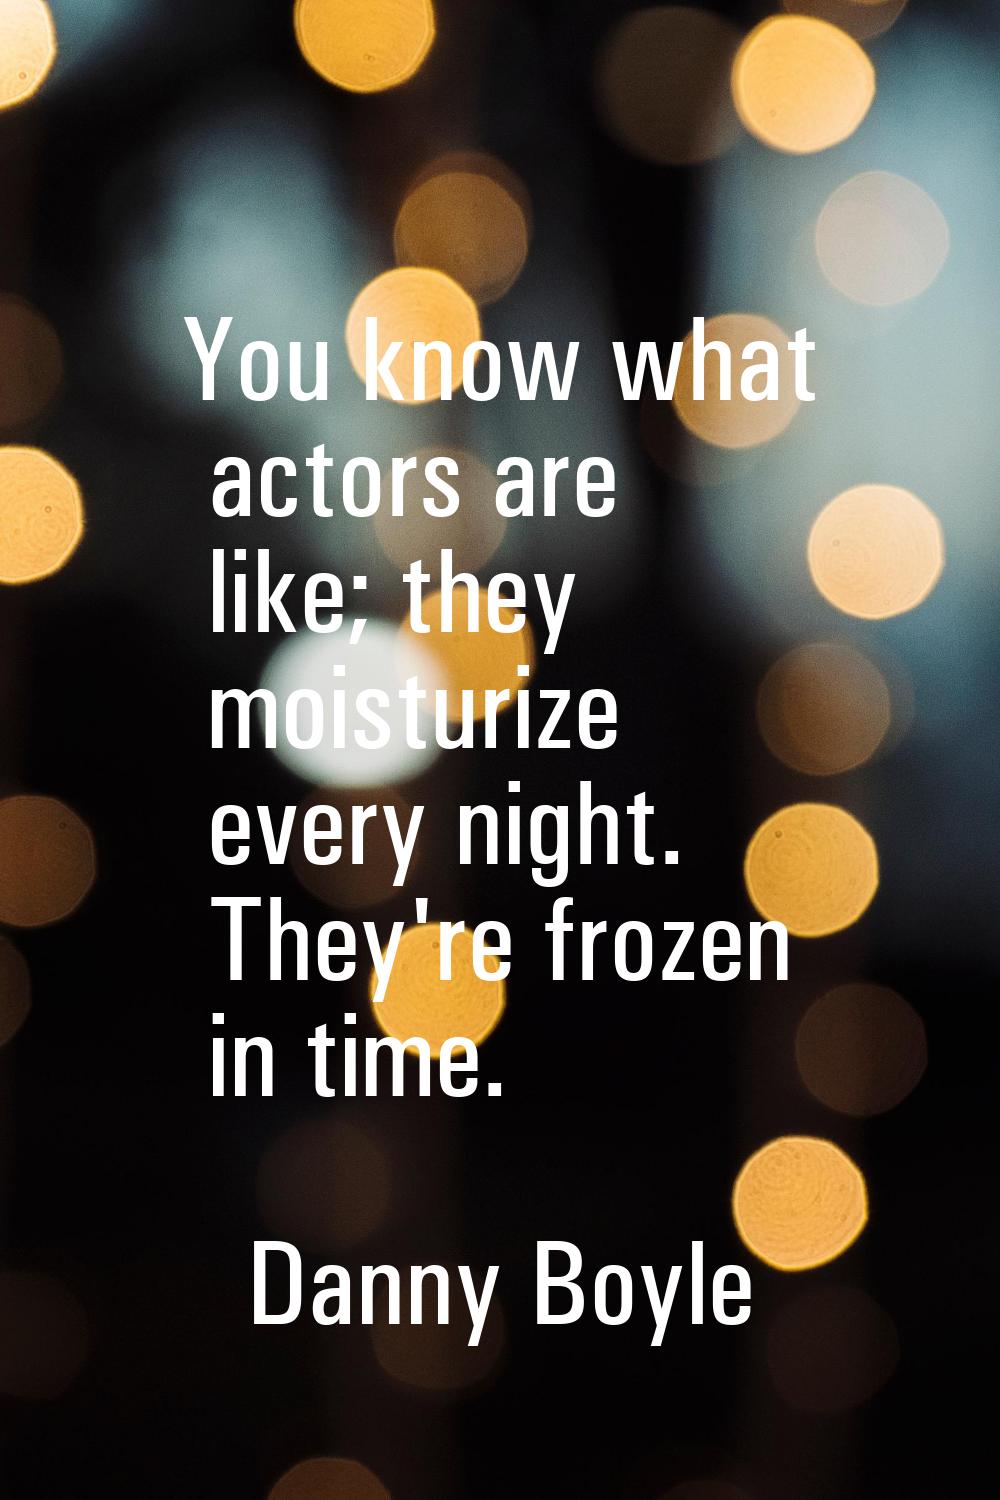 You know what actors are like; they moisturize every night. They're frozen in time.